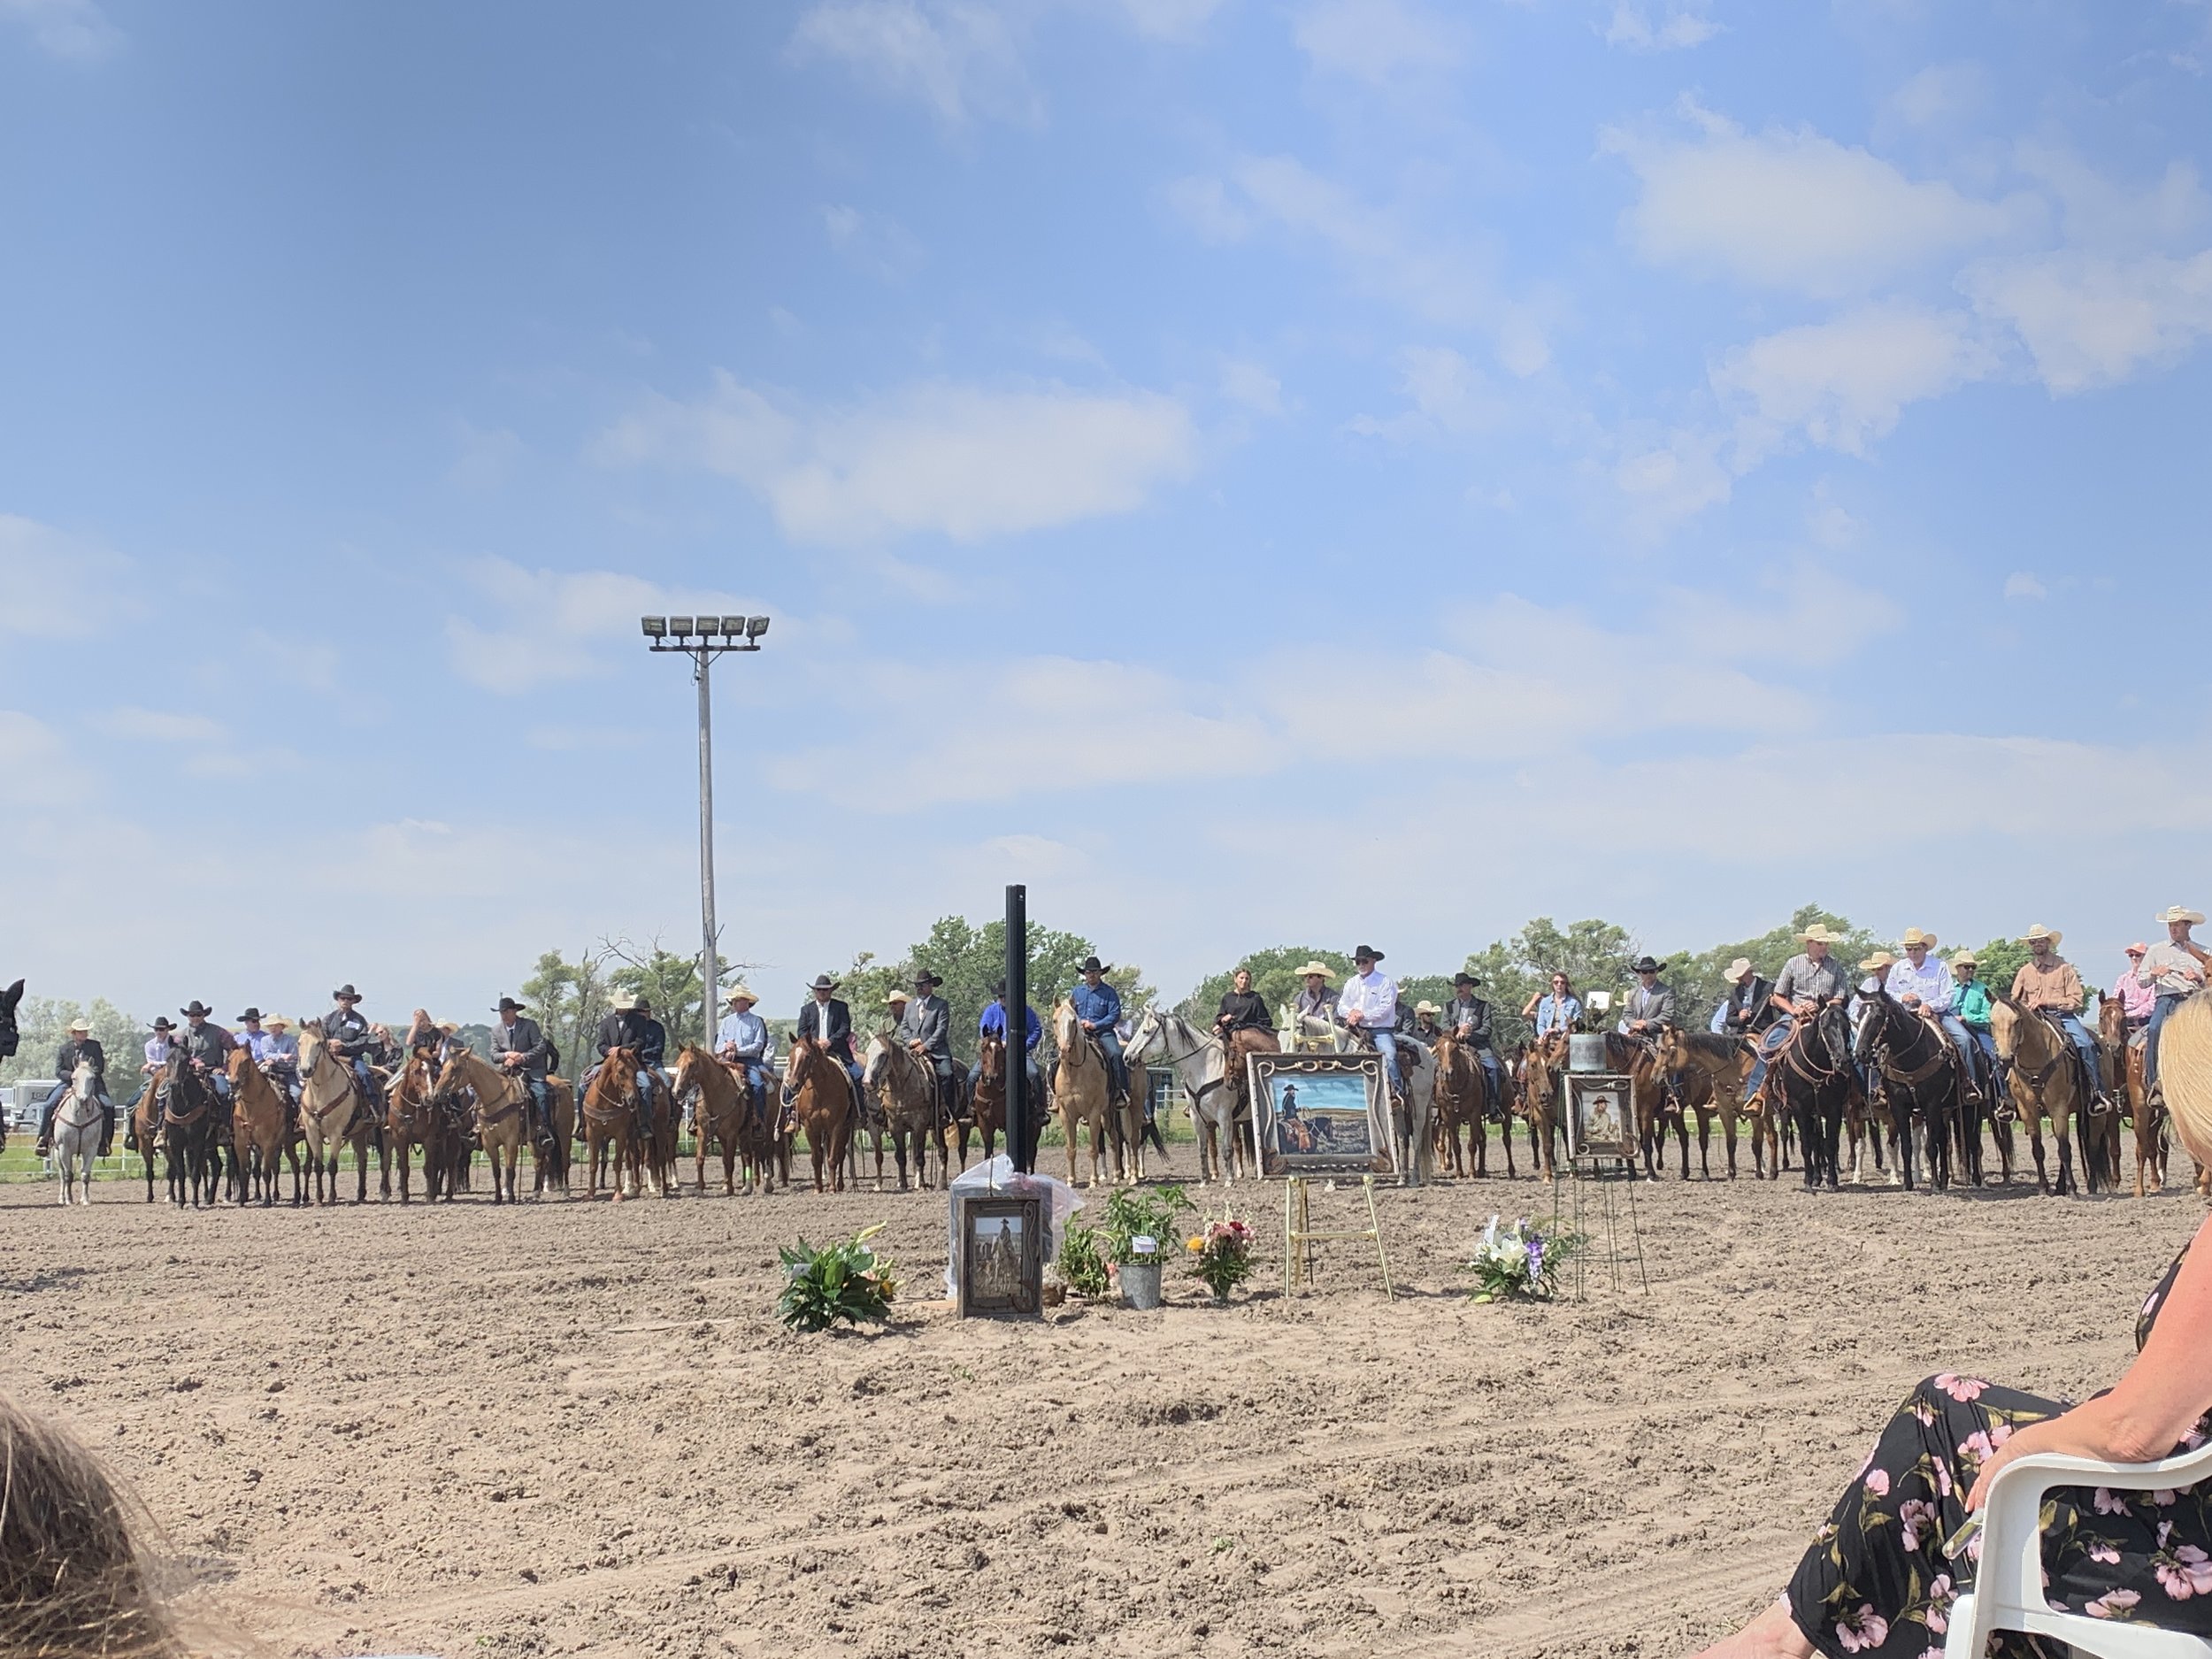  Brock’s cousin, Terrel Vineyard passed away in a freak lightning accident while checking cattle. His funeral was such a testament to his life, work ethic, and overall great personality. The entire arena was full of horseback riders paying tribute to